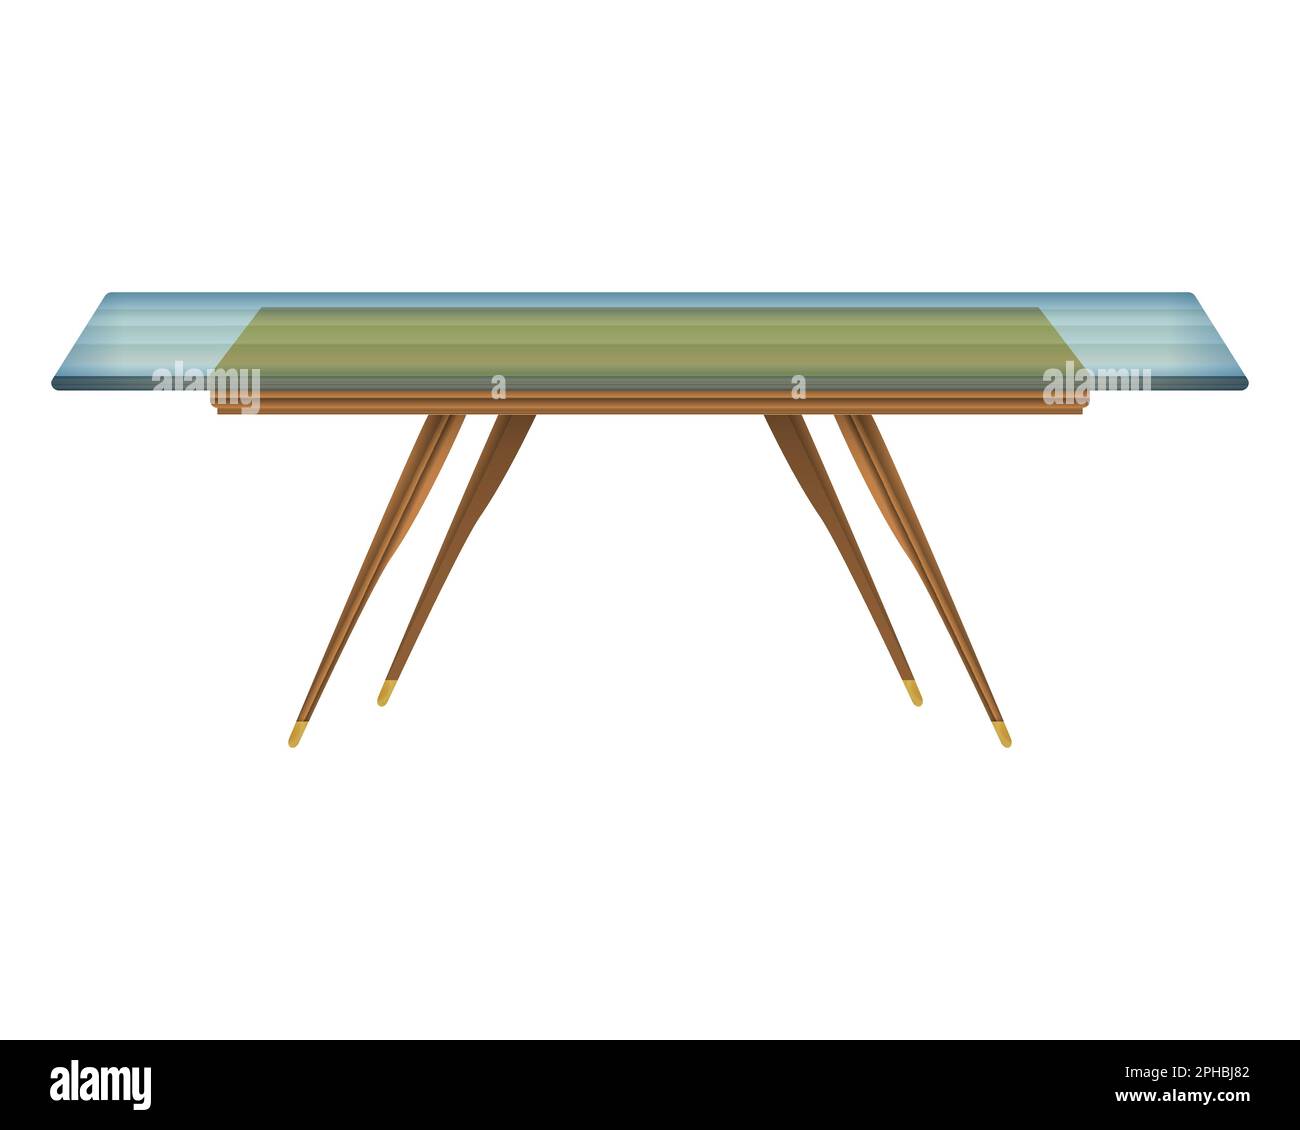 Glass tabletop wood table top view in realistic style. Transparent table top. Home wooden furniture design. Colorful vector illustration isolated on a Stock Vector